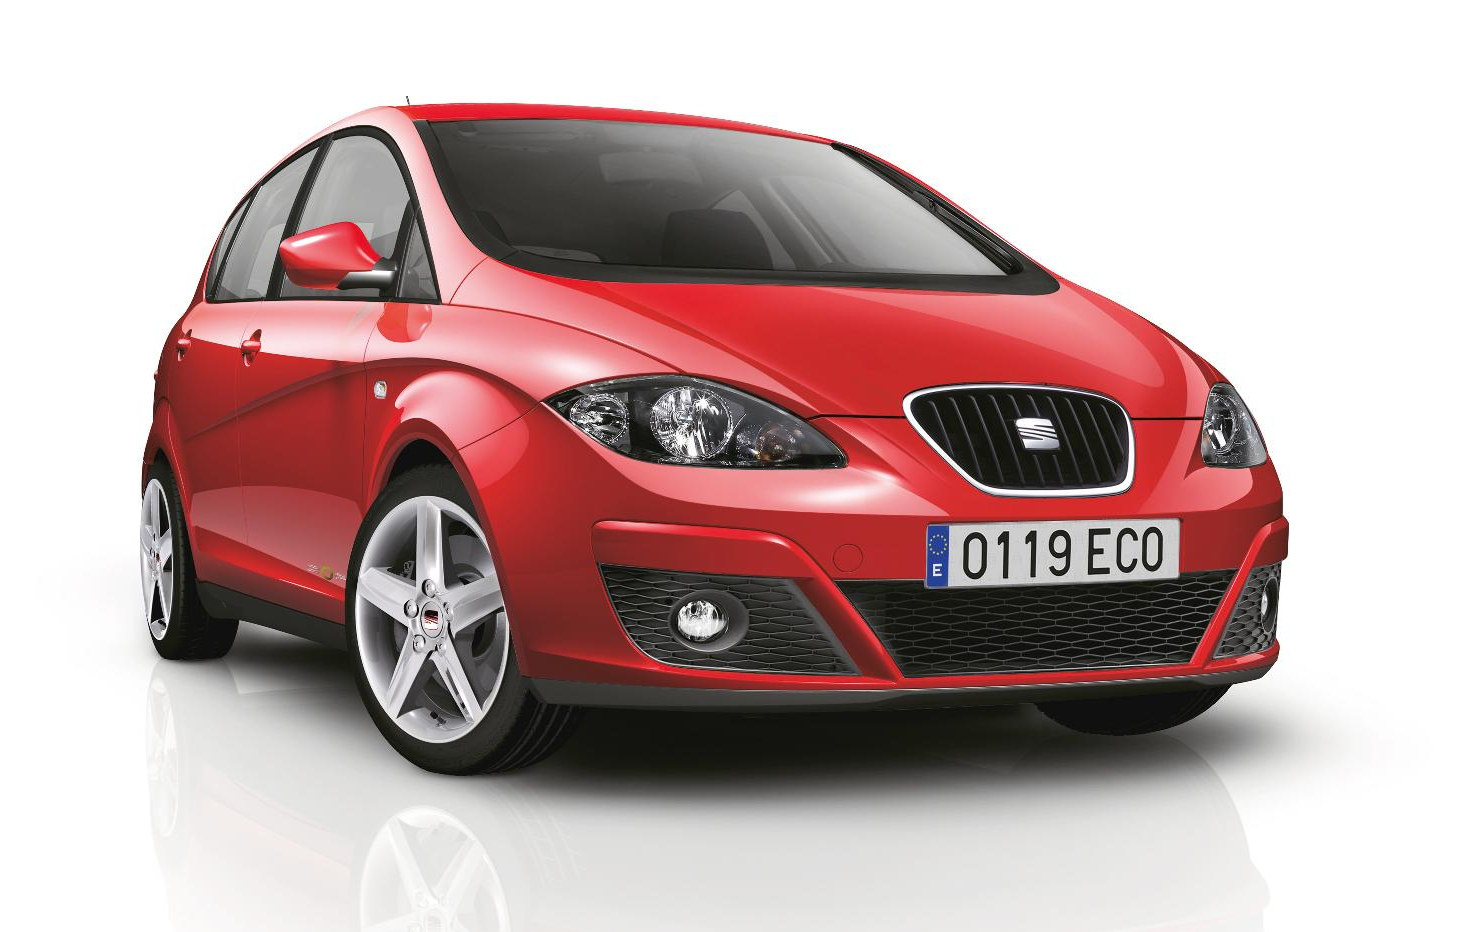 SEAT Altea Copa edition at SEAT Altea Copa Editions Launched in UK